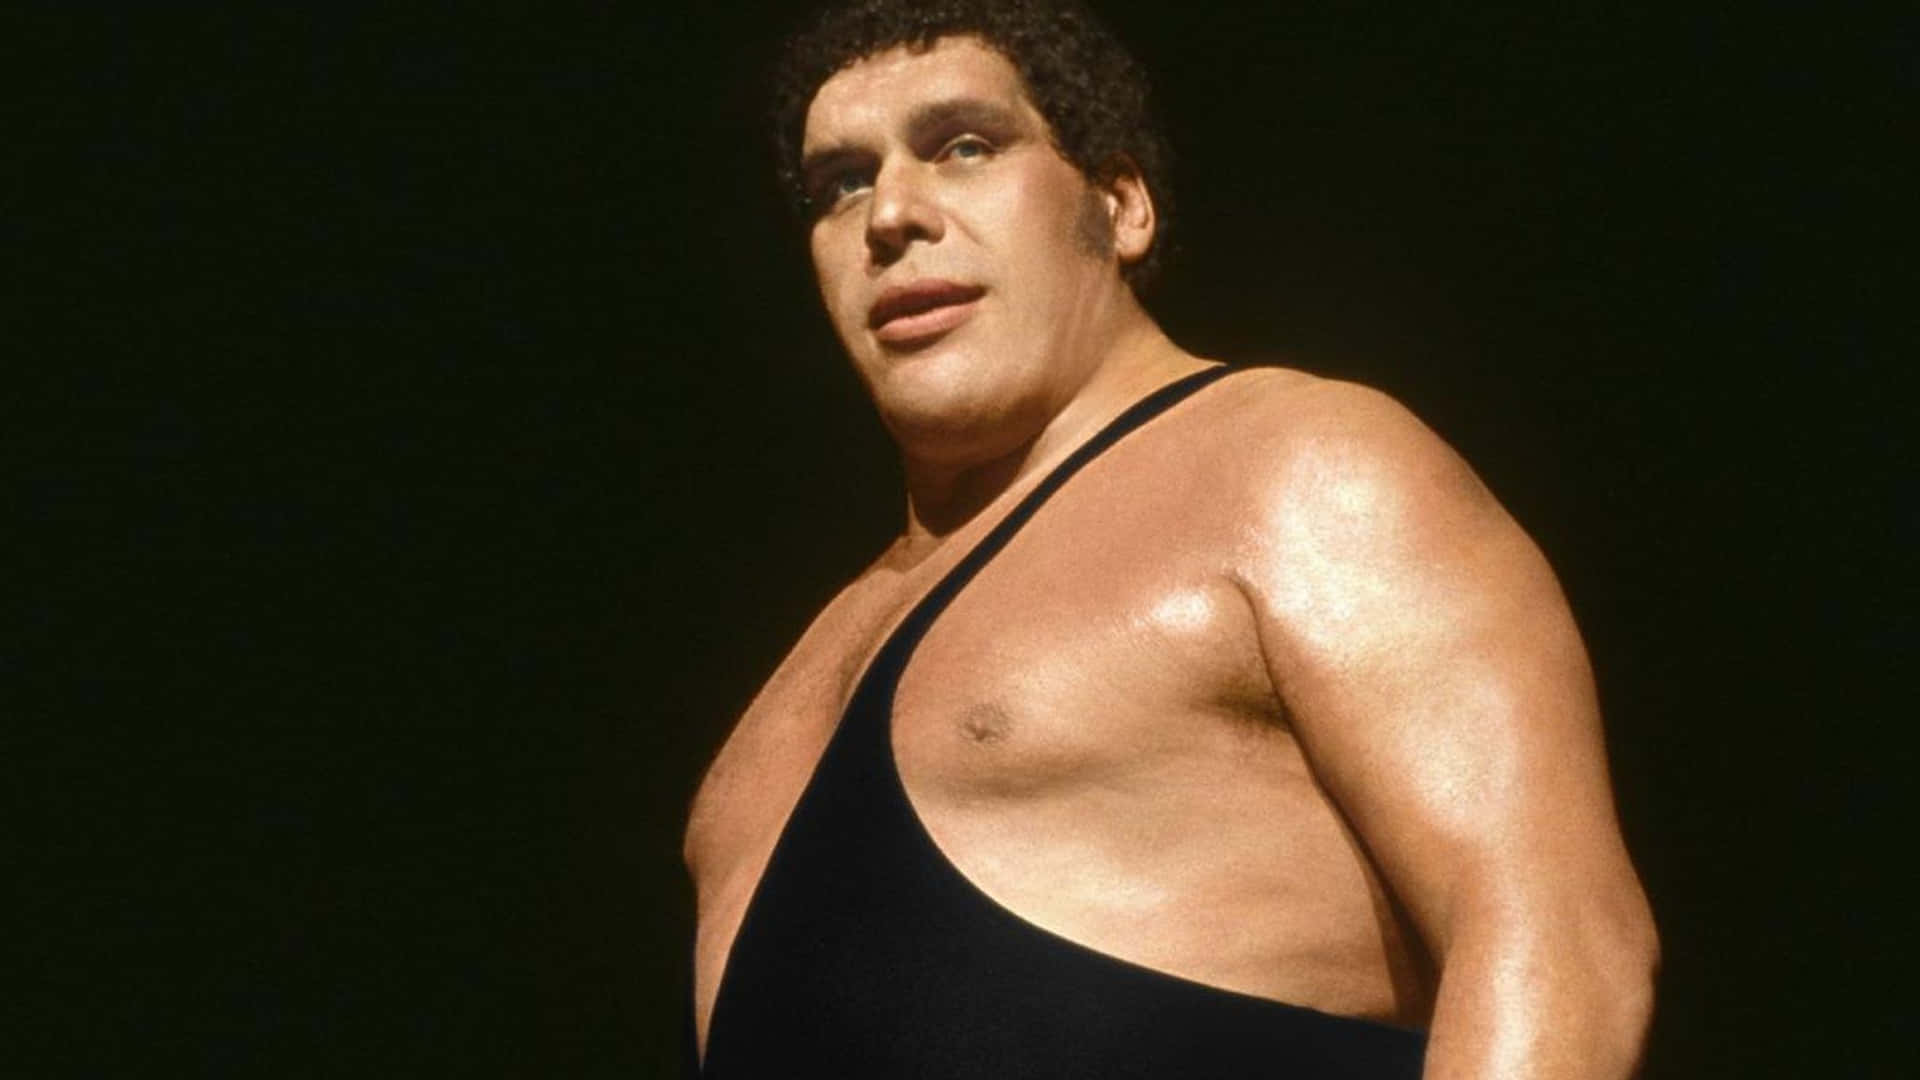 Andre The Giant Dominating the Wrestling Ring Wallpaper